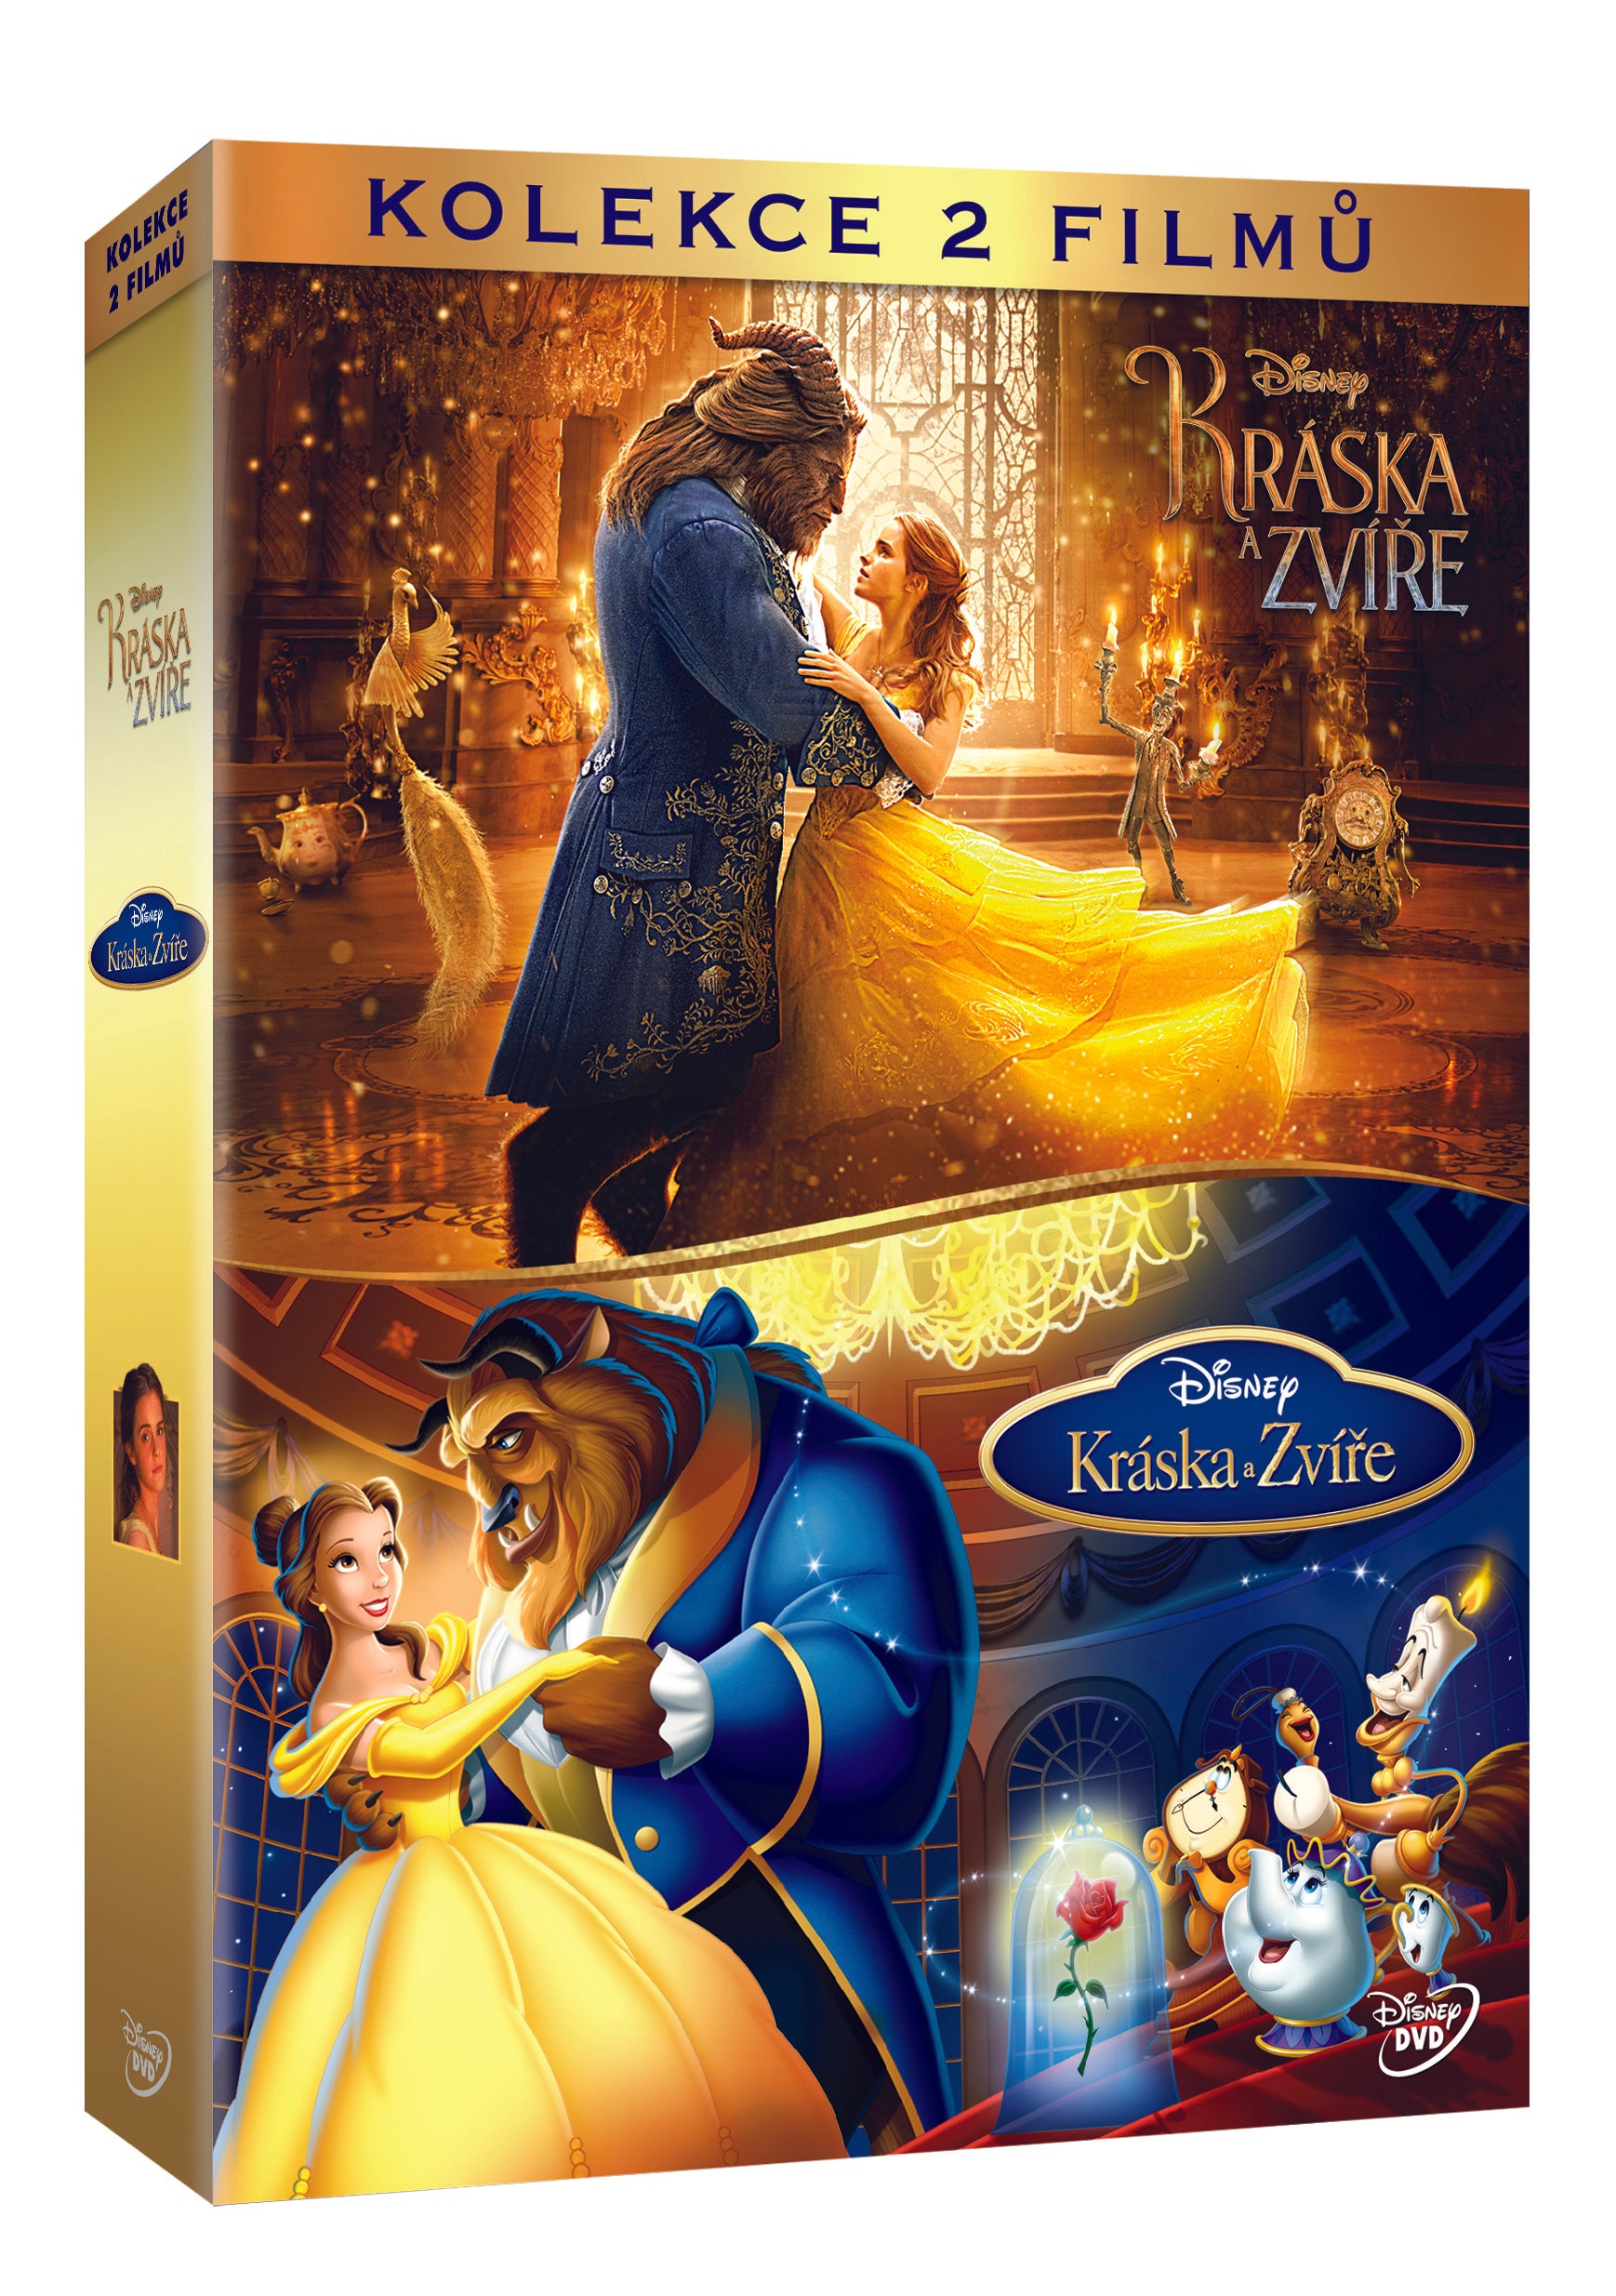 Kraska a zvire kolekce 2DVD / Beauty and the Beast + Beauty and the Beast - Special Edition